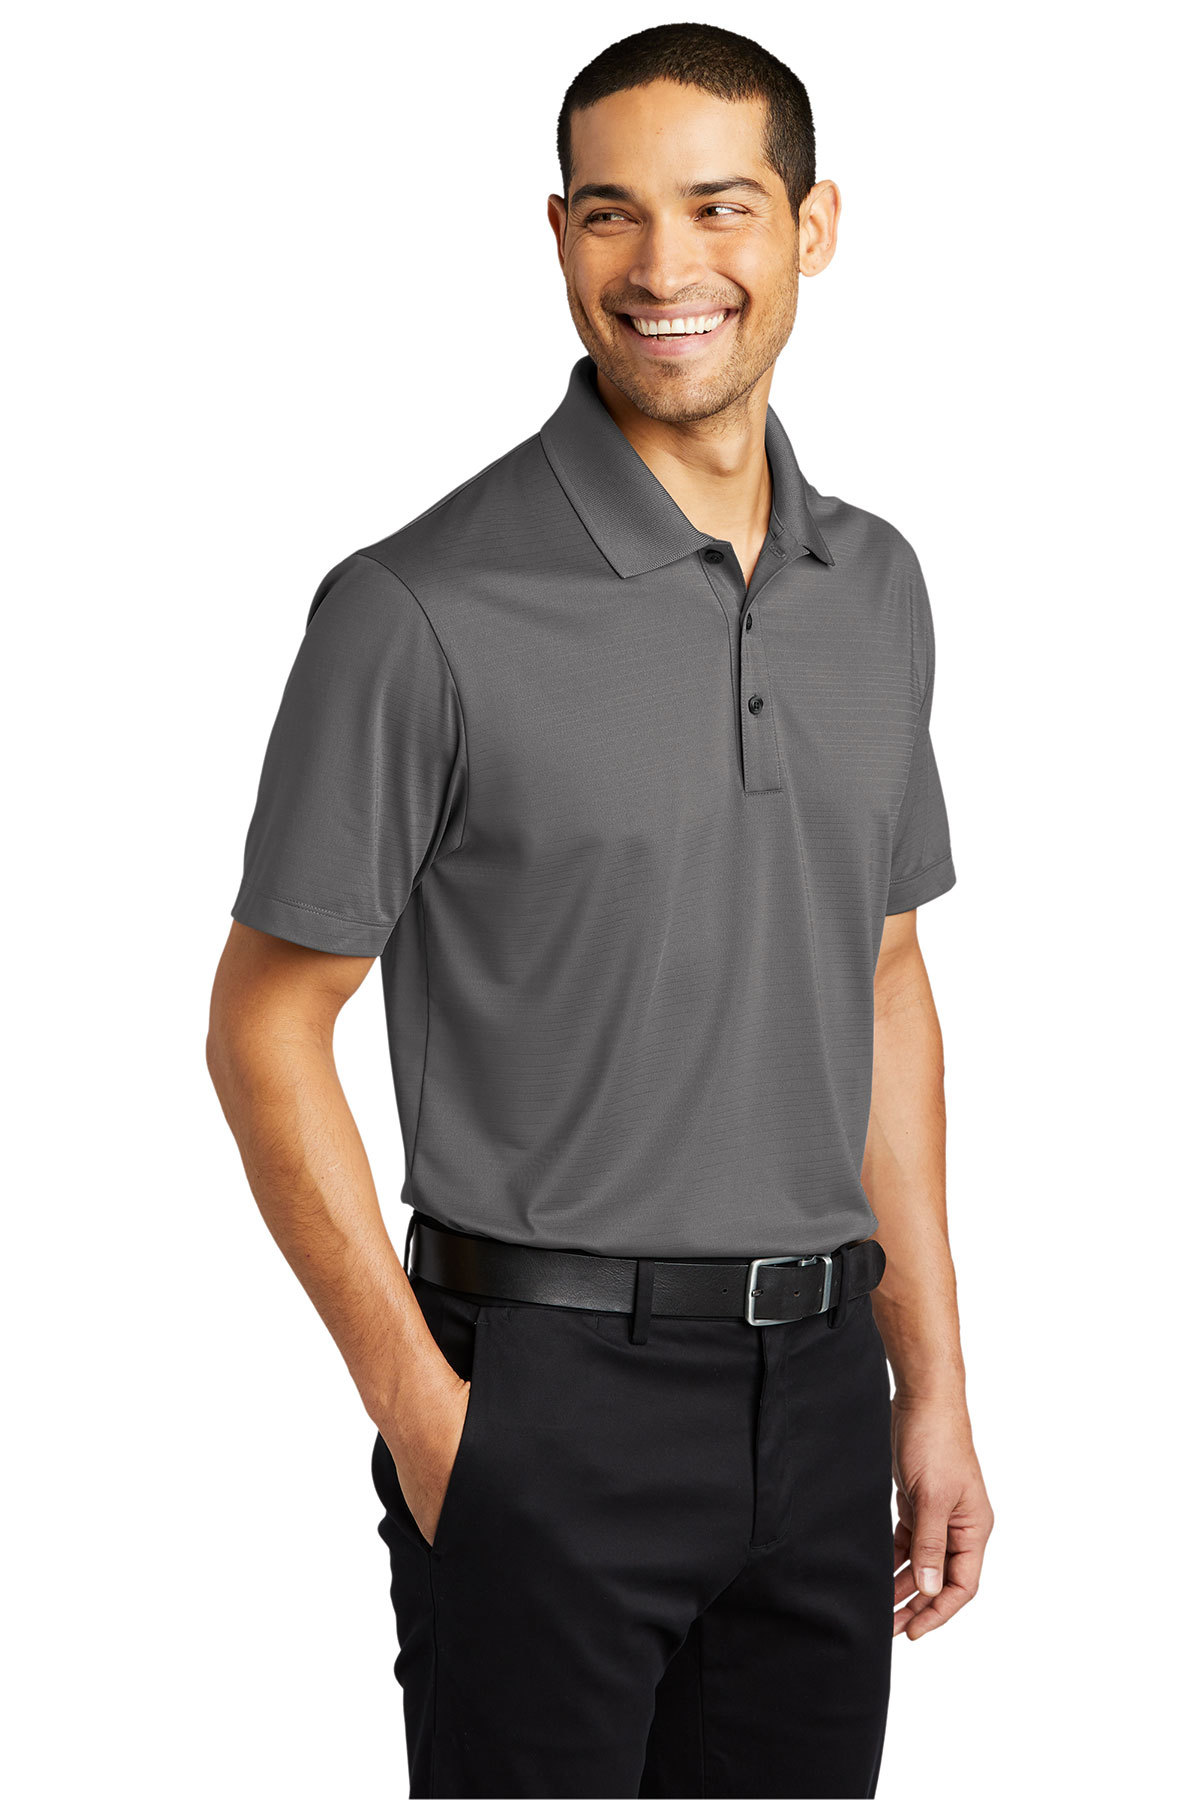 Port Authority Eclipse Stretch Polo | Product | SanMar